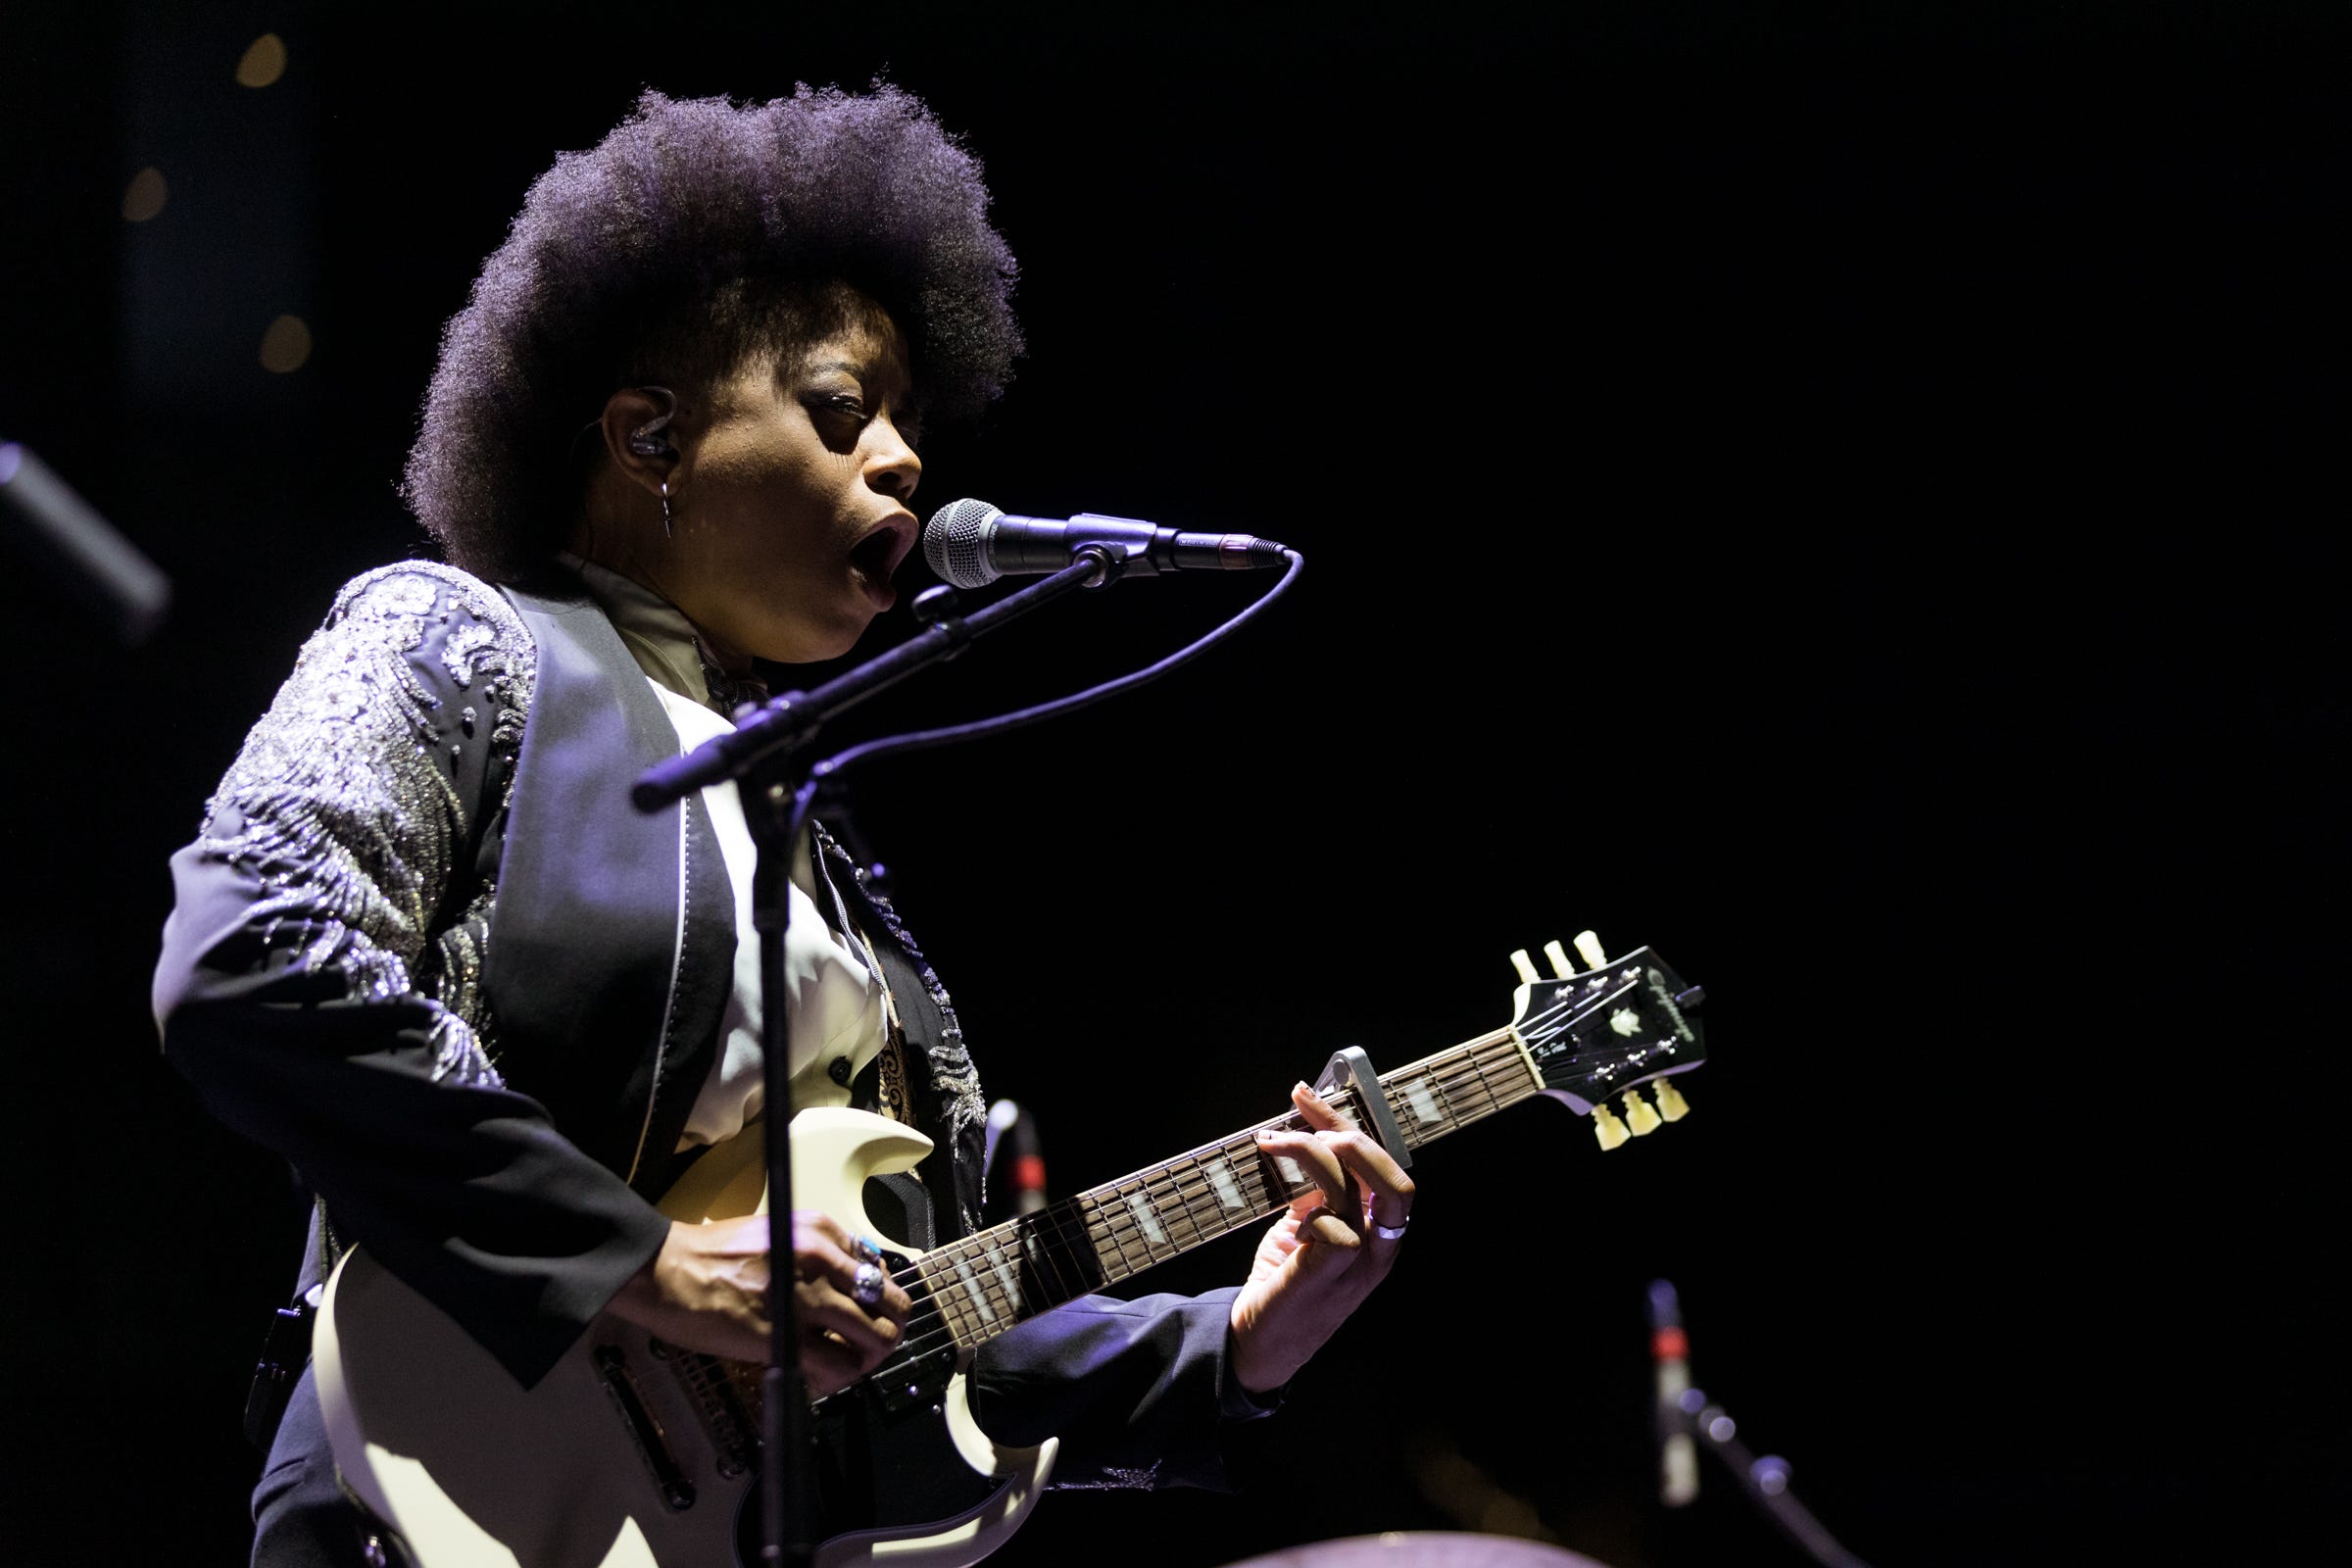 Amythyst Kiah opens for The Who at the Moody Center on Tuesday, May 3, 2022.